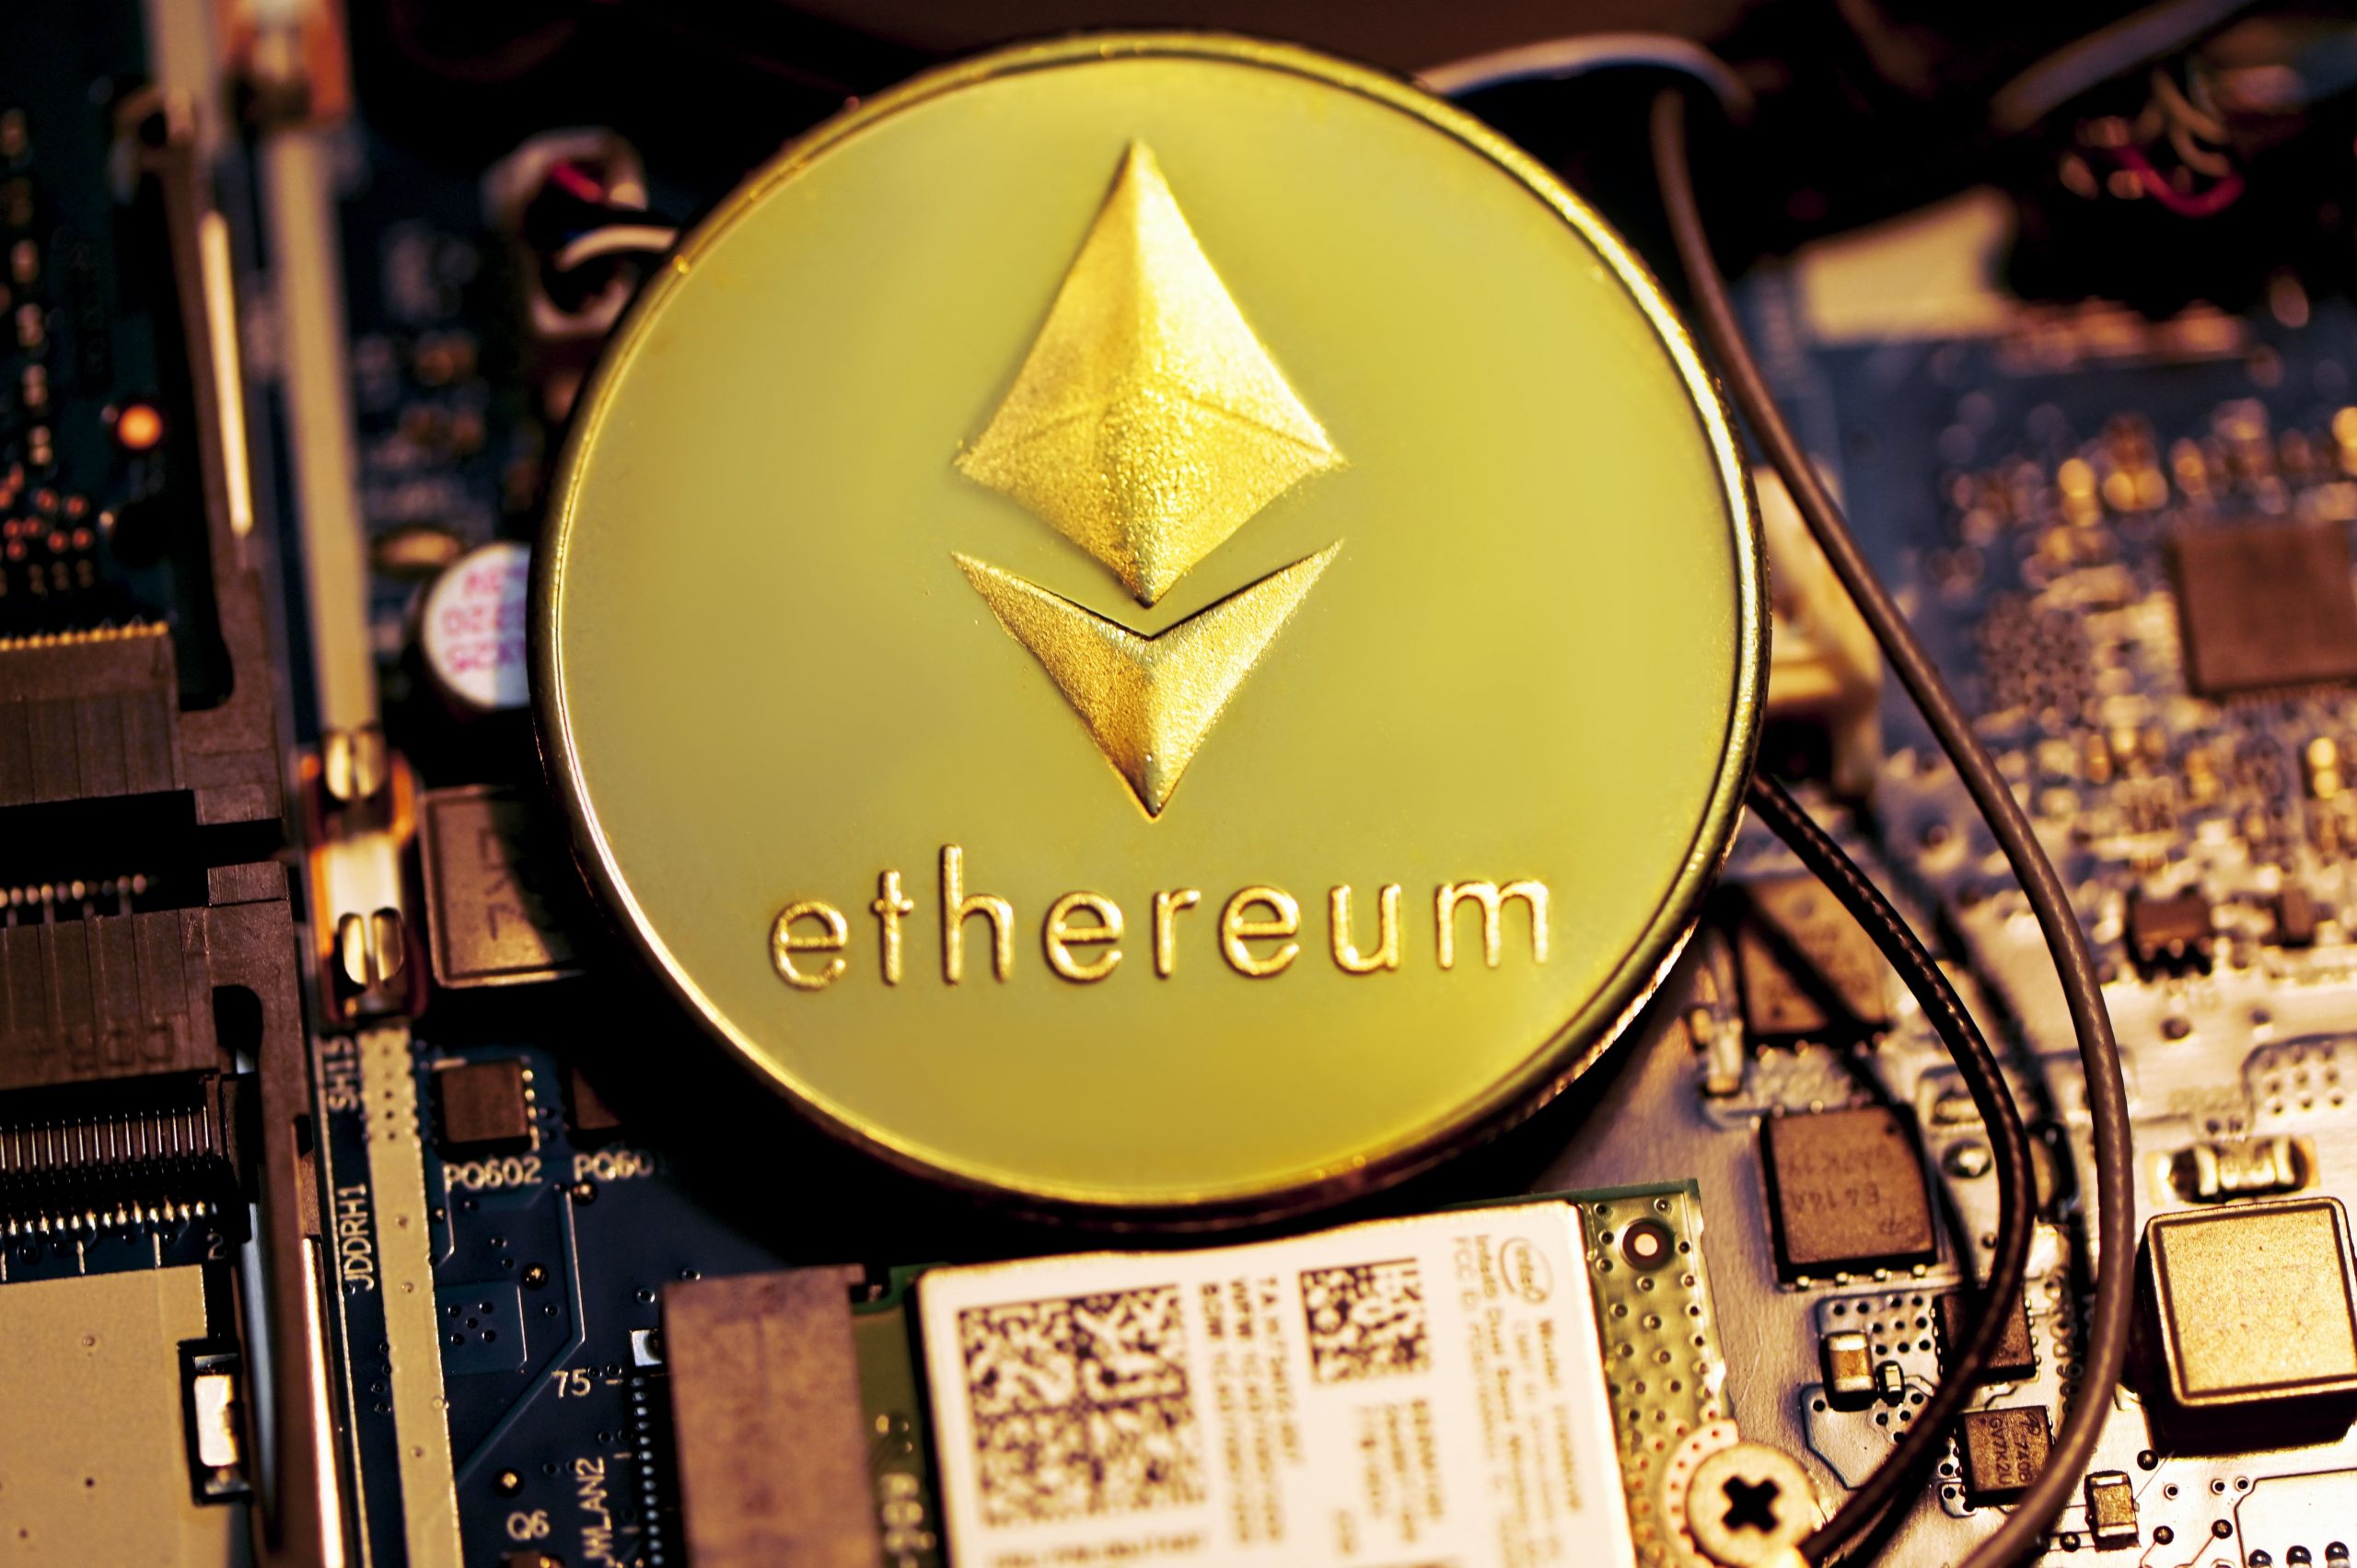 How Ethereum has changed: Before the Merge and after